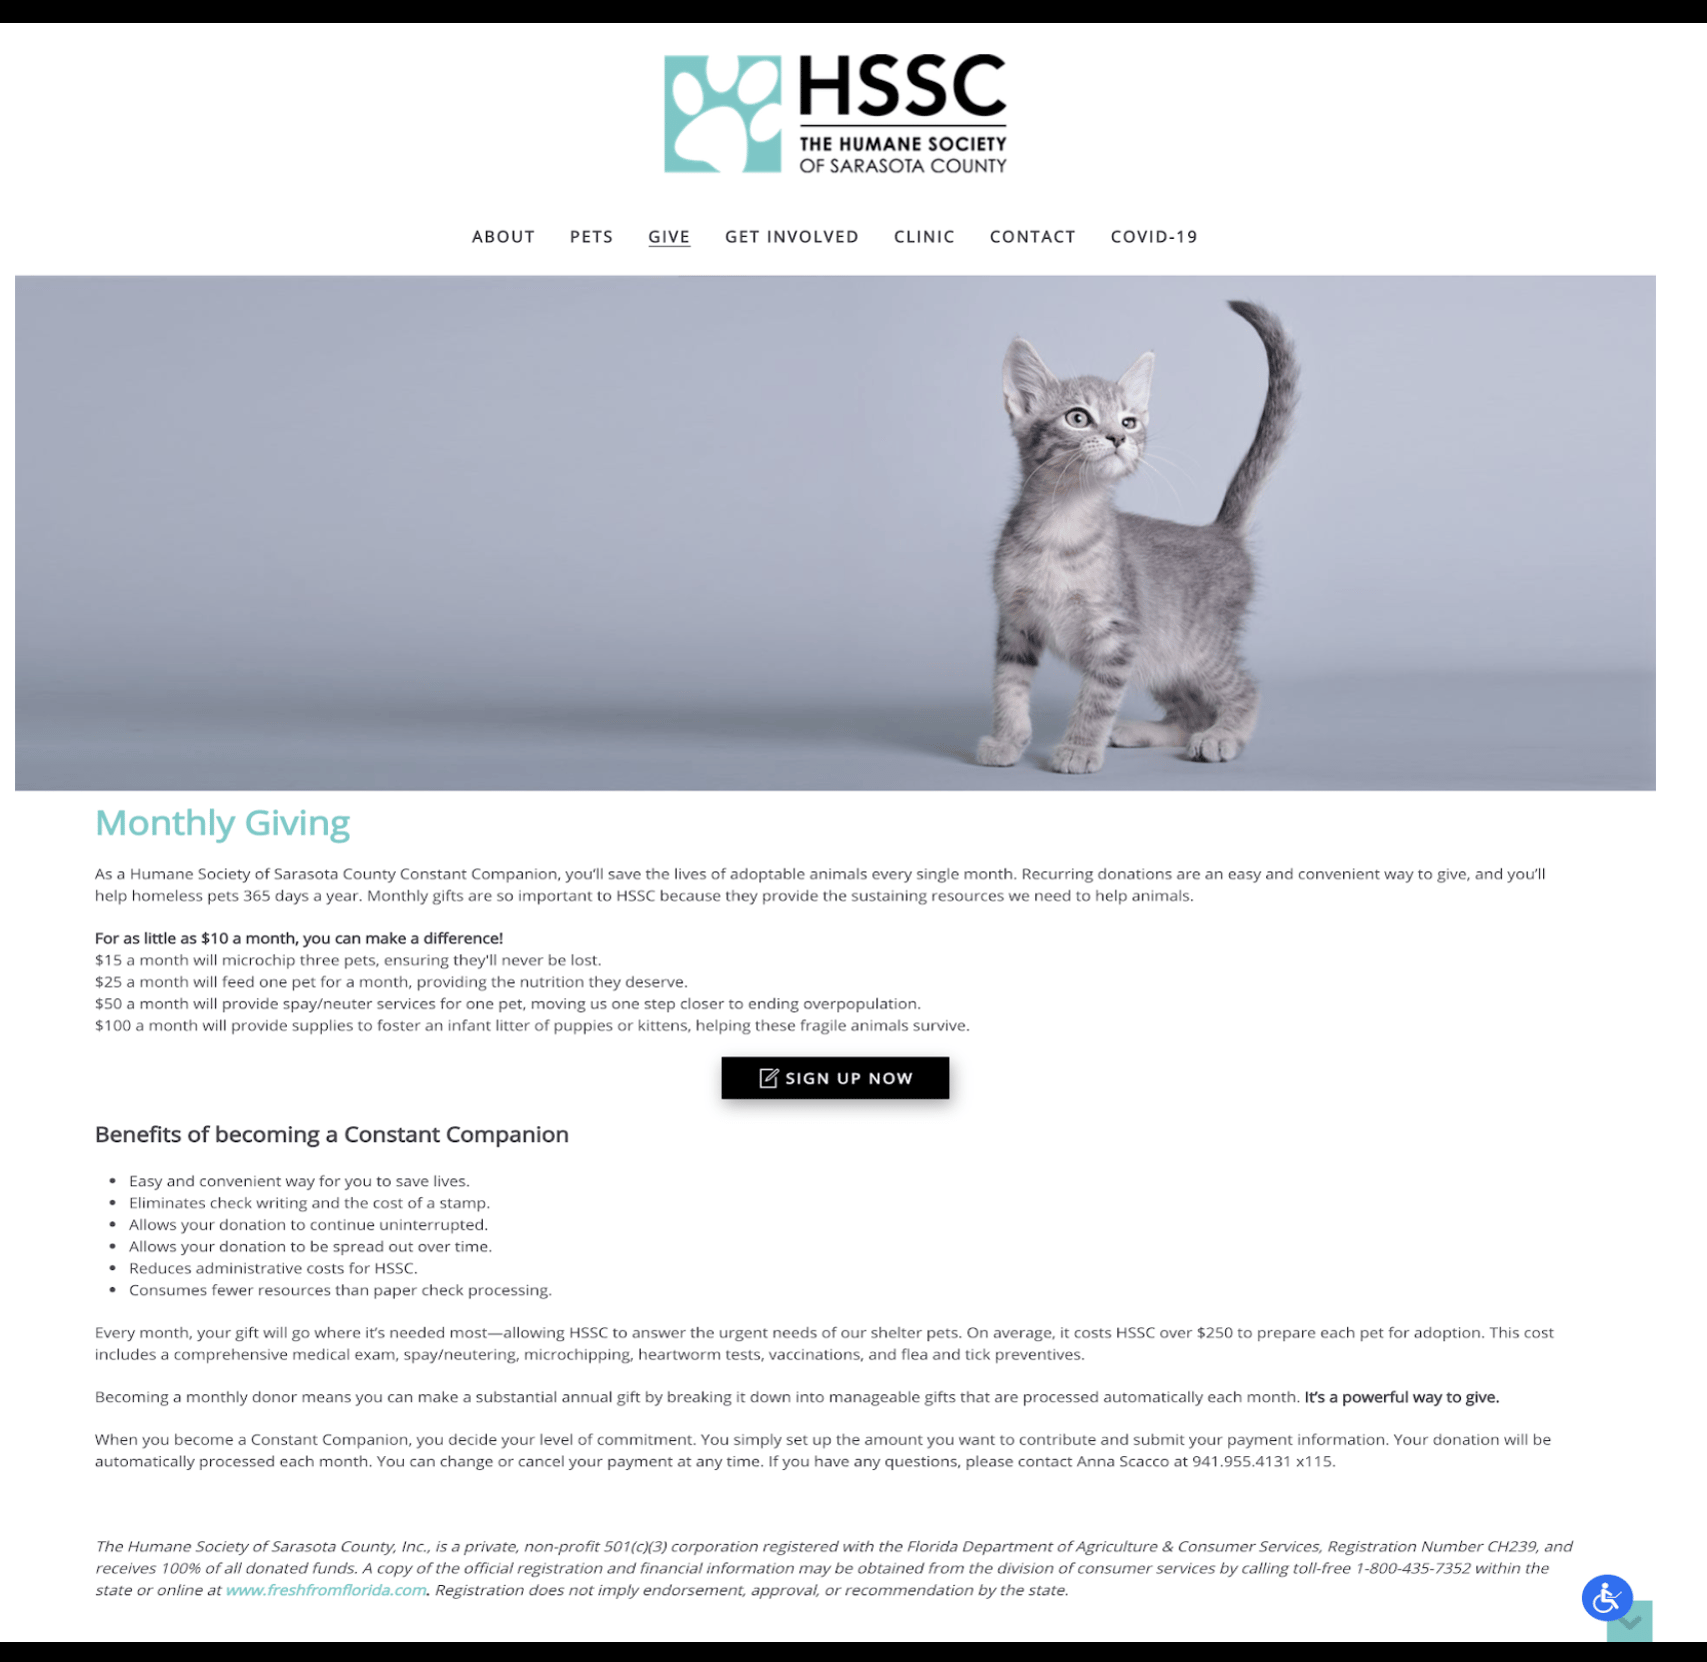 Clicking "Give" on the navigation menu of the Humane Society's website opens a page titled "Monthly Giving" with information about this program, such as the impact of different giving amounts and why this program benefits the Humane Society more, and a button to "Sign up now"